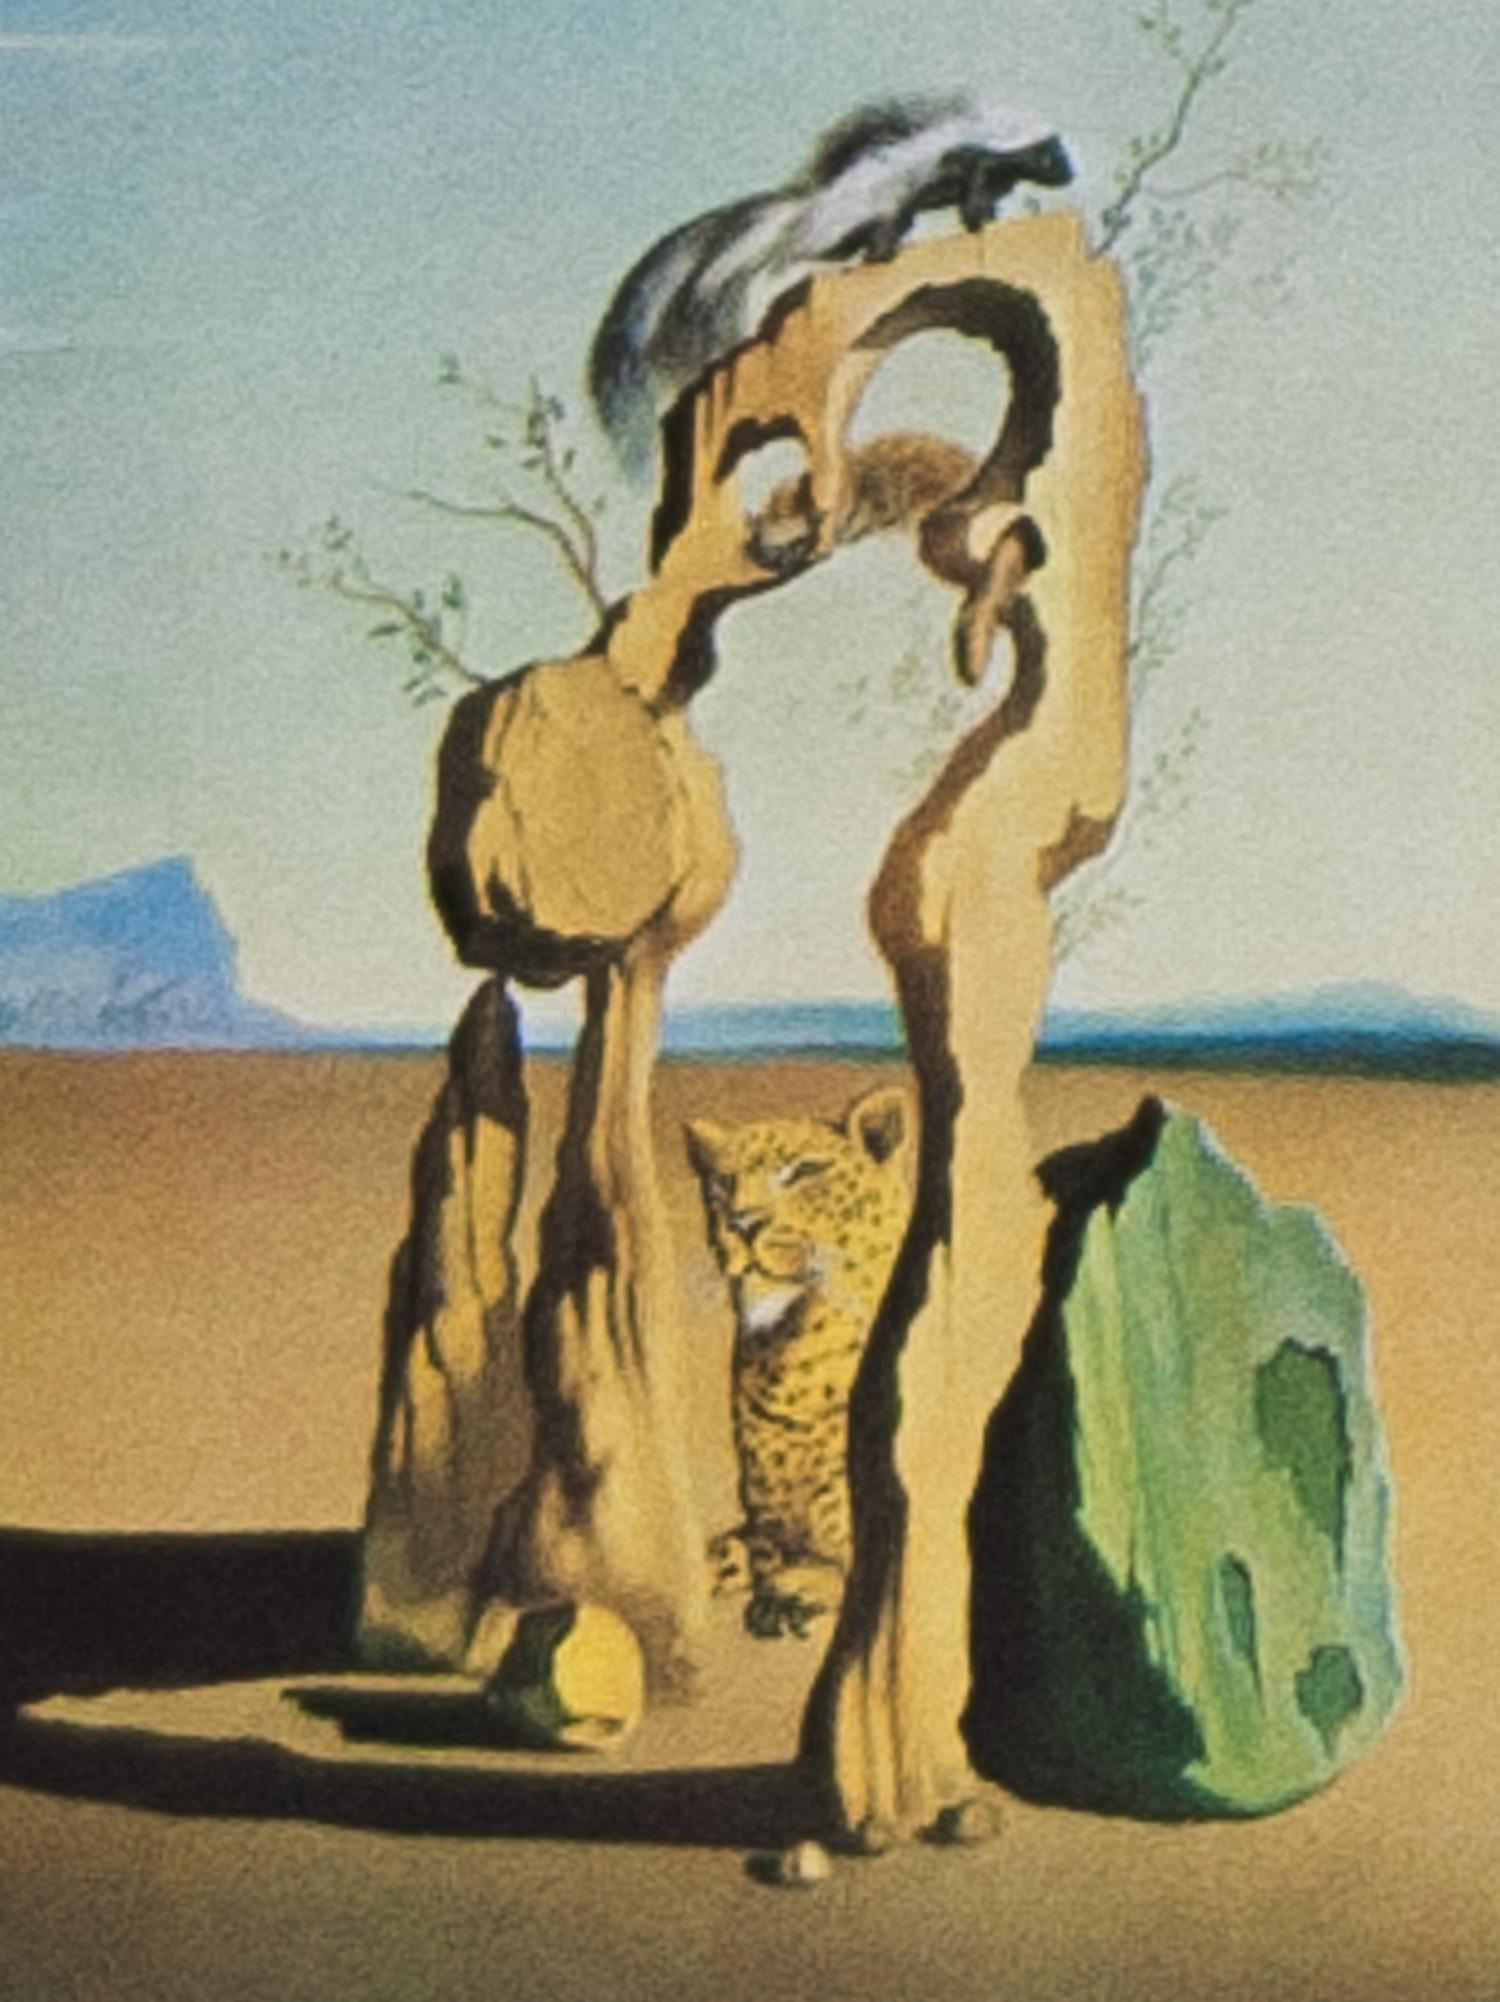 Savage Beasts in the Desert / Little Animal Kingdom color lithograph by Salvador - Print by Salvador Dalí